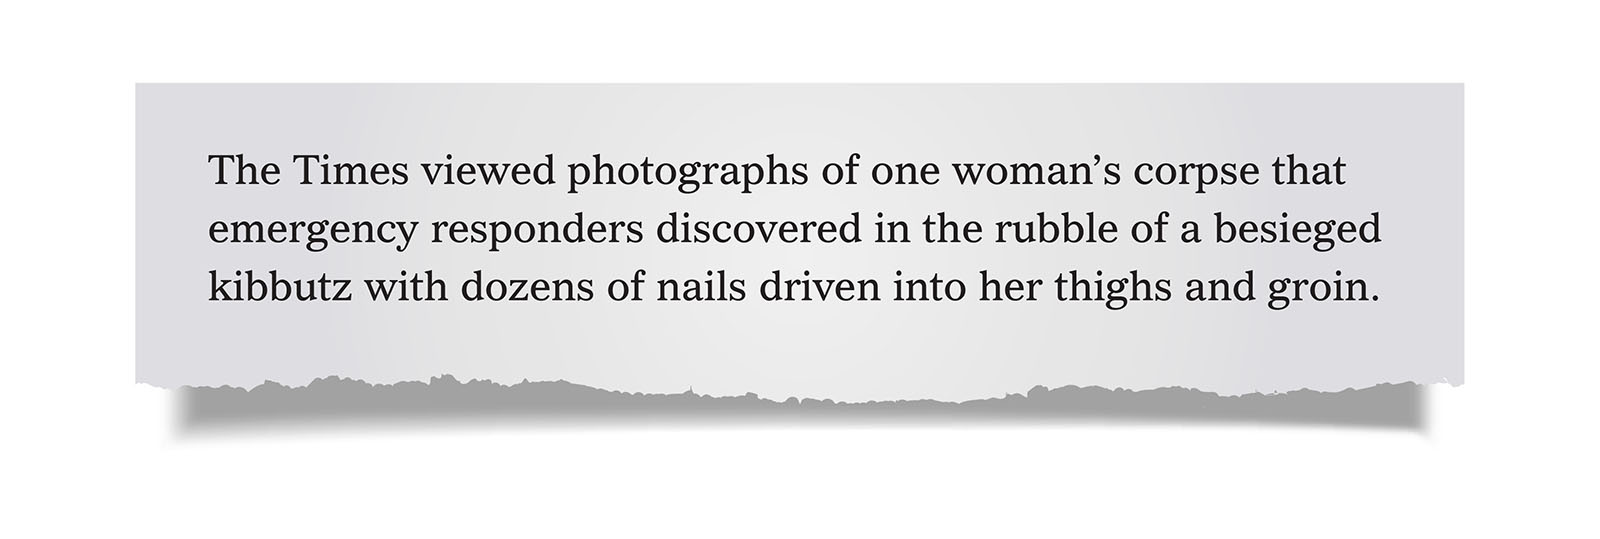 Pull Quote:
The Times viewed photographs of one woman’s corpse that emergency responders discovered in the rubble of a besieged kibbutz with dozens of nails driven into her thighs and groin.